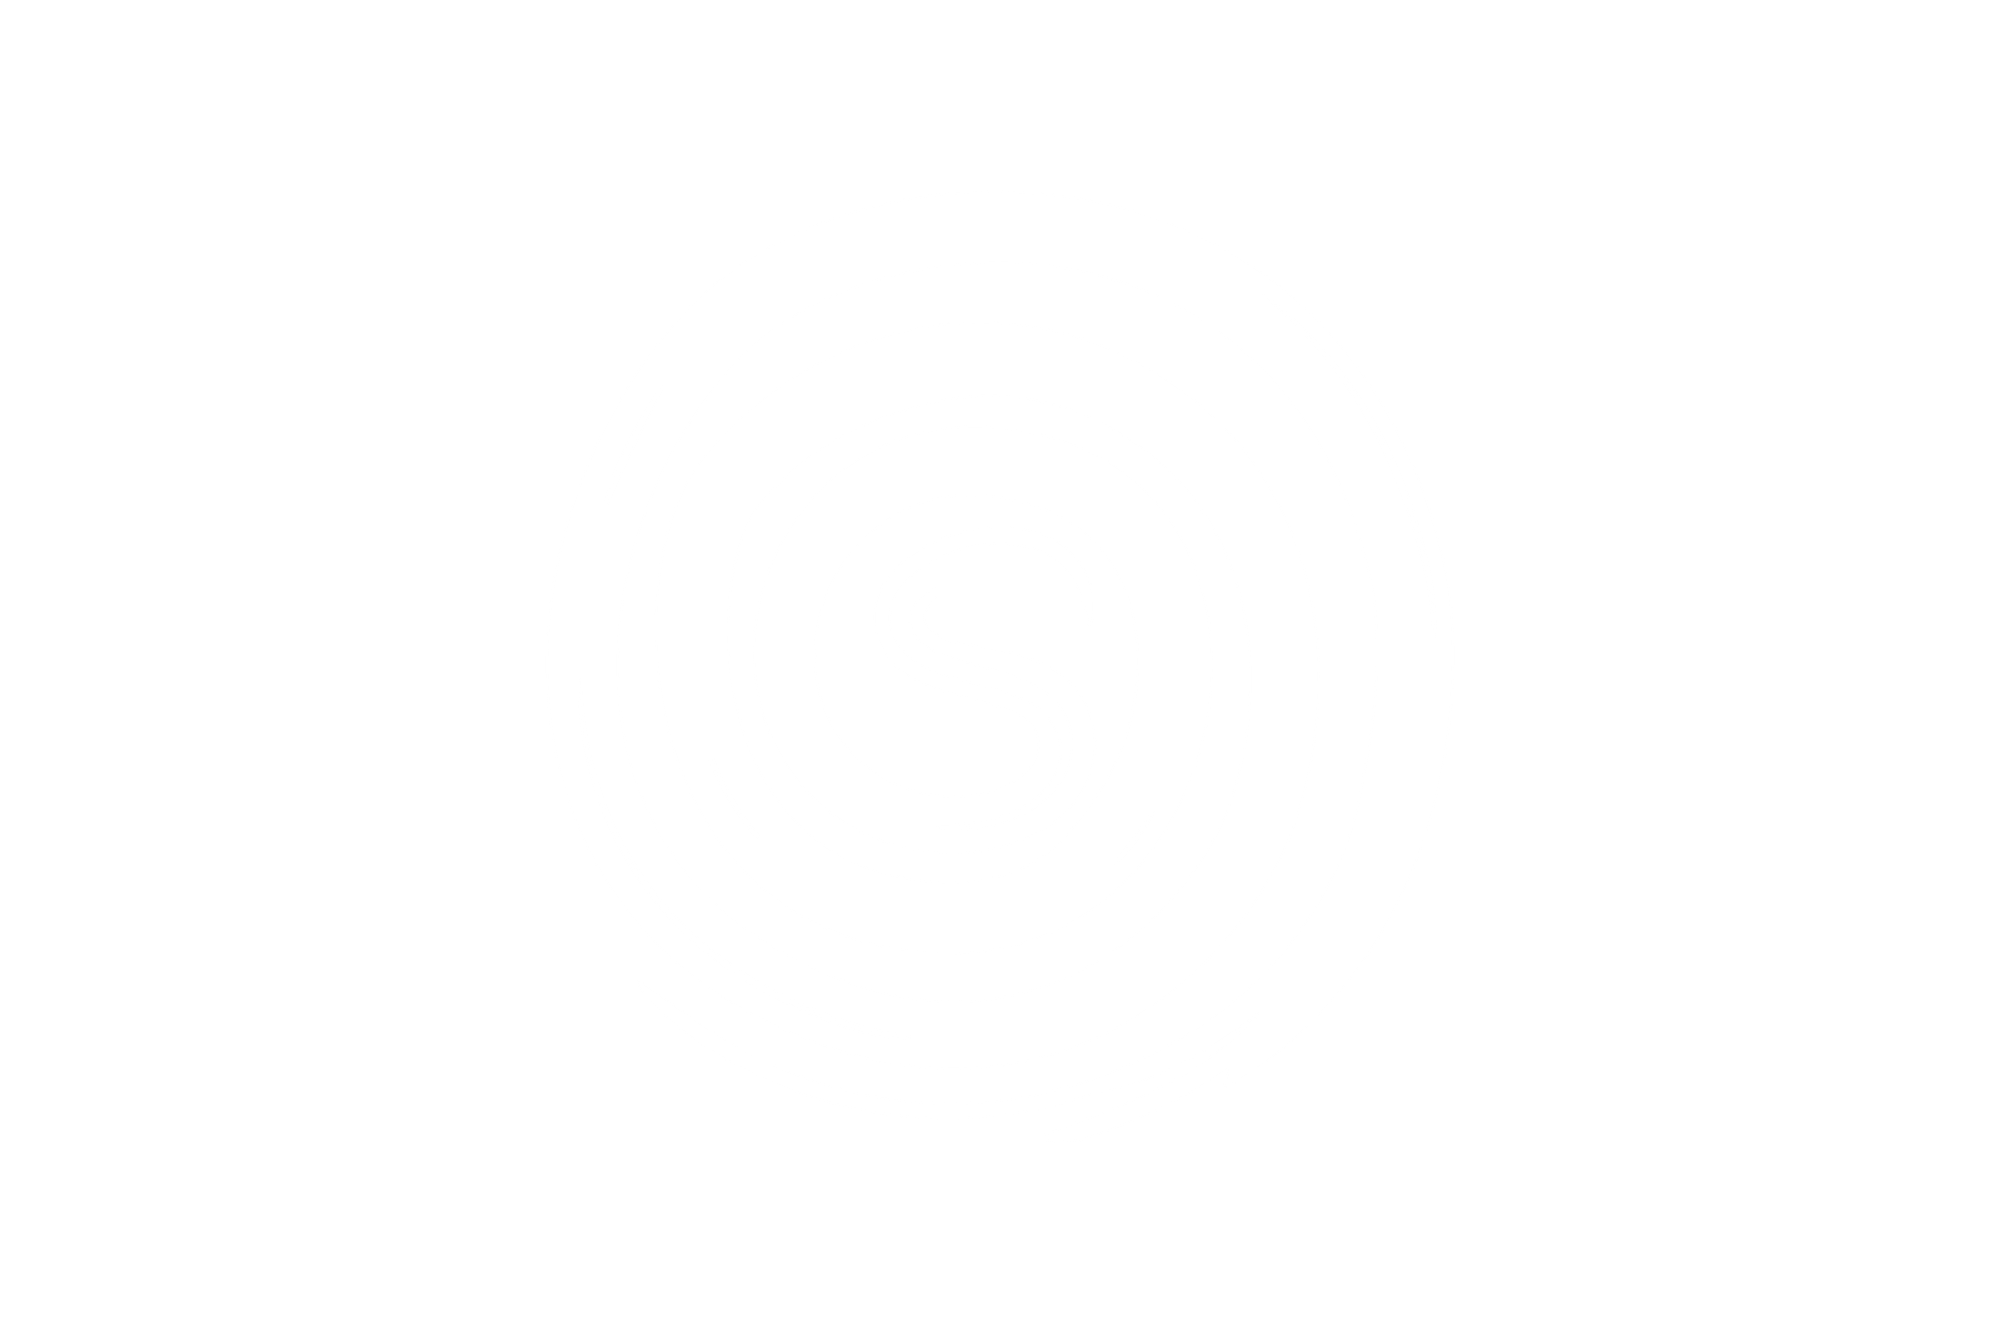 The logo of this Company - a winding path beginning with the letter S opens into a spiral. 